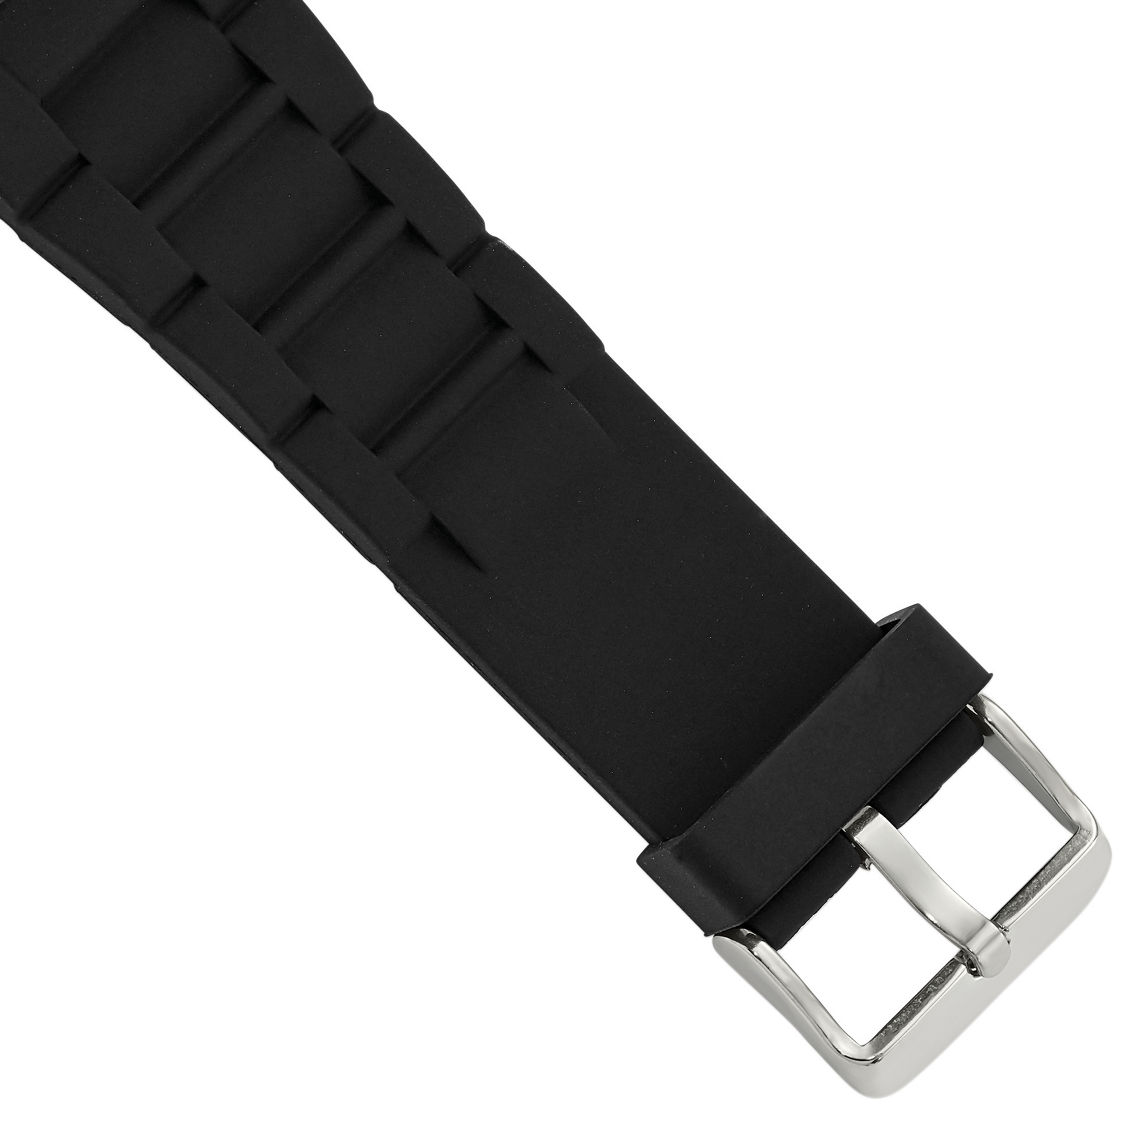 Debeer 26mm Black Link Style Silicone Rubber Stainless Steel Buckle Watch Band - Image 3 of 4